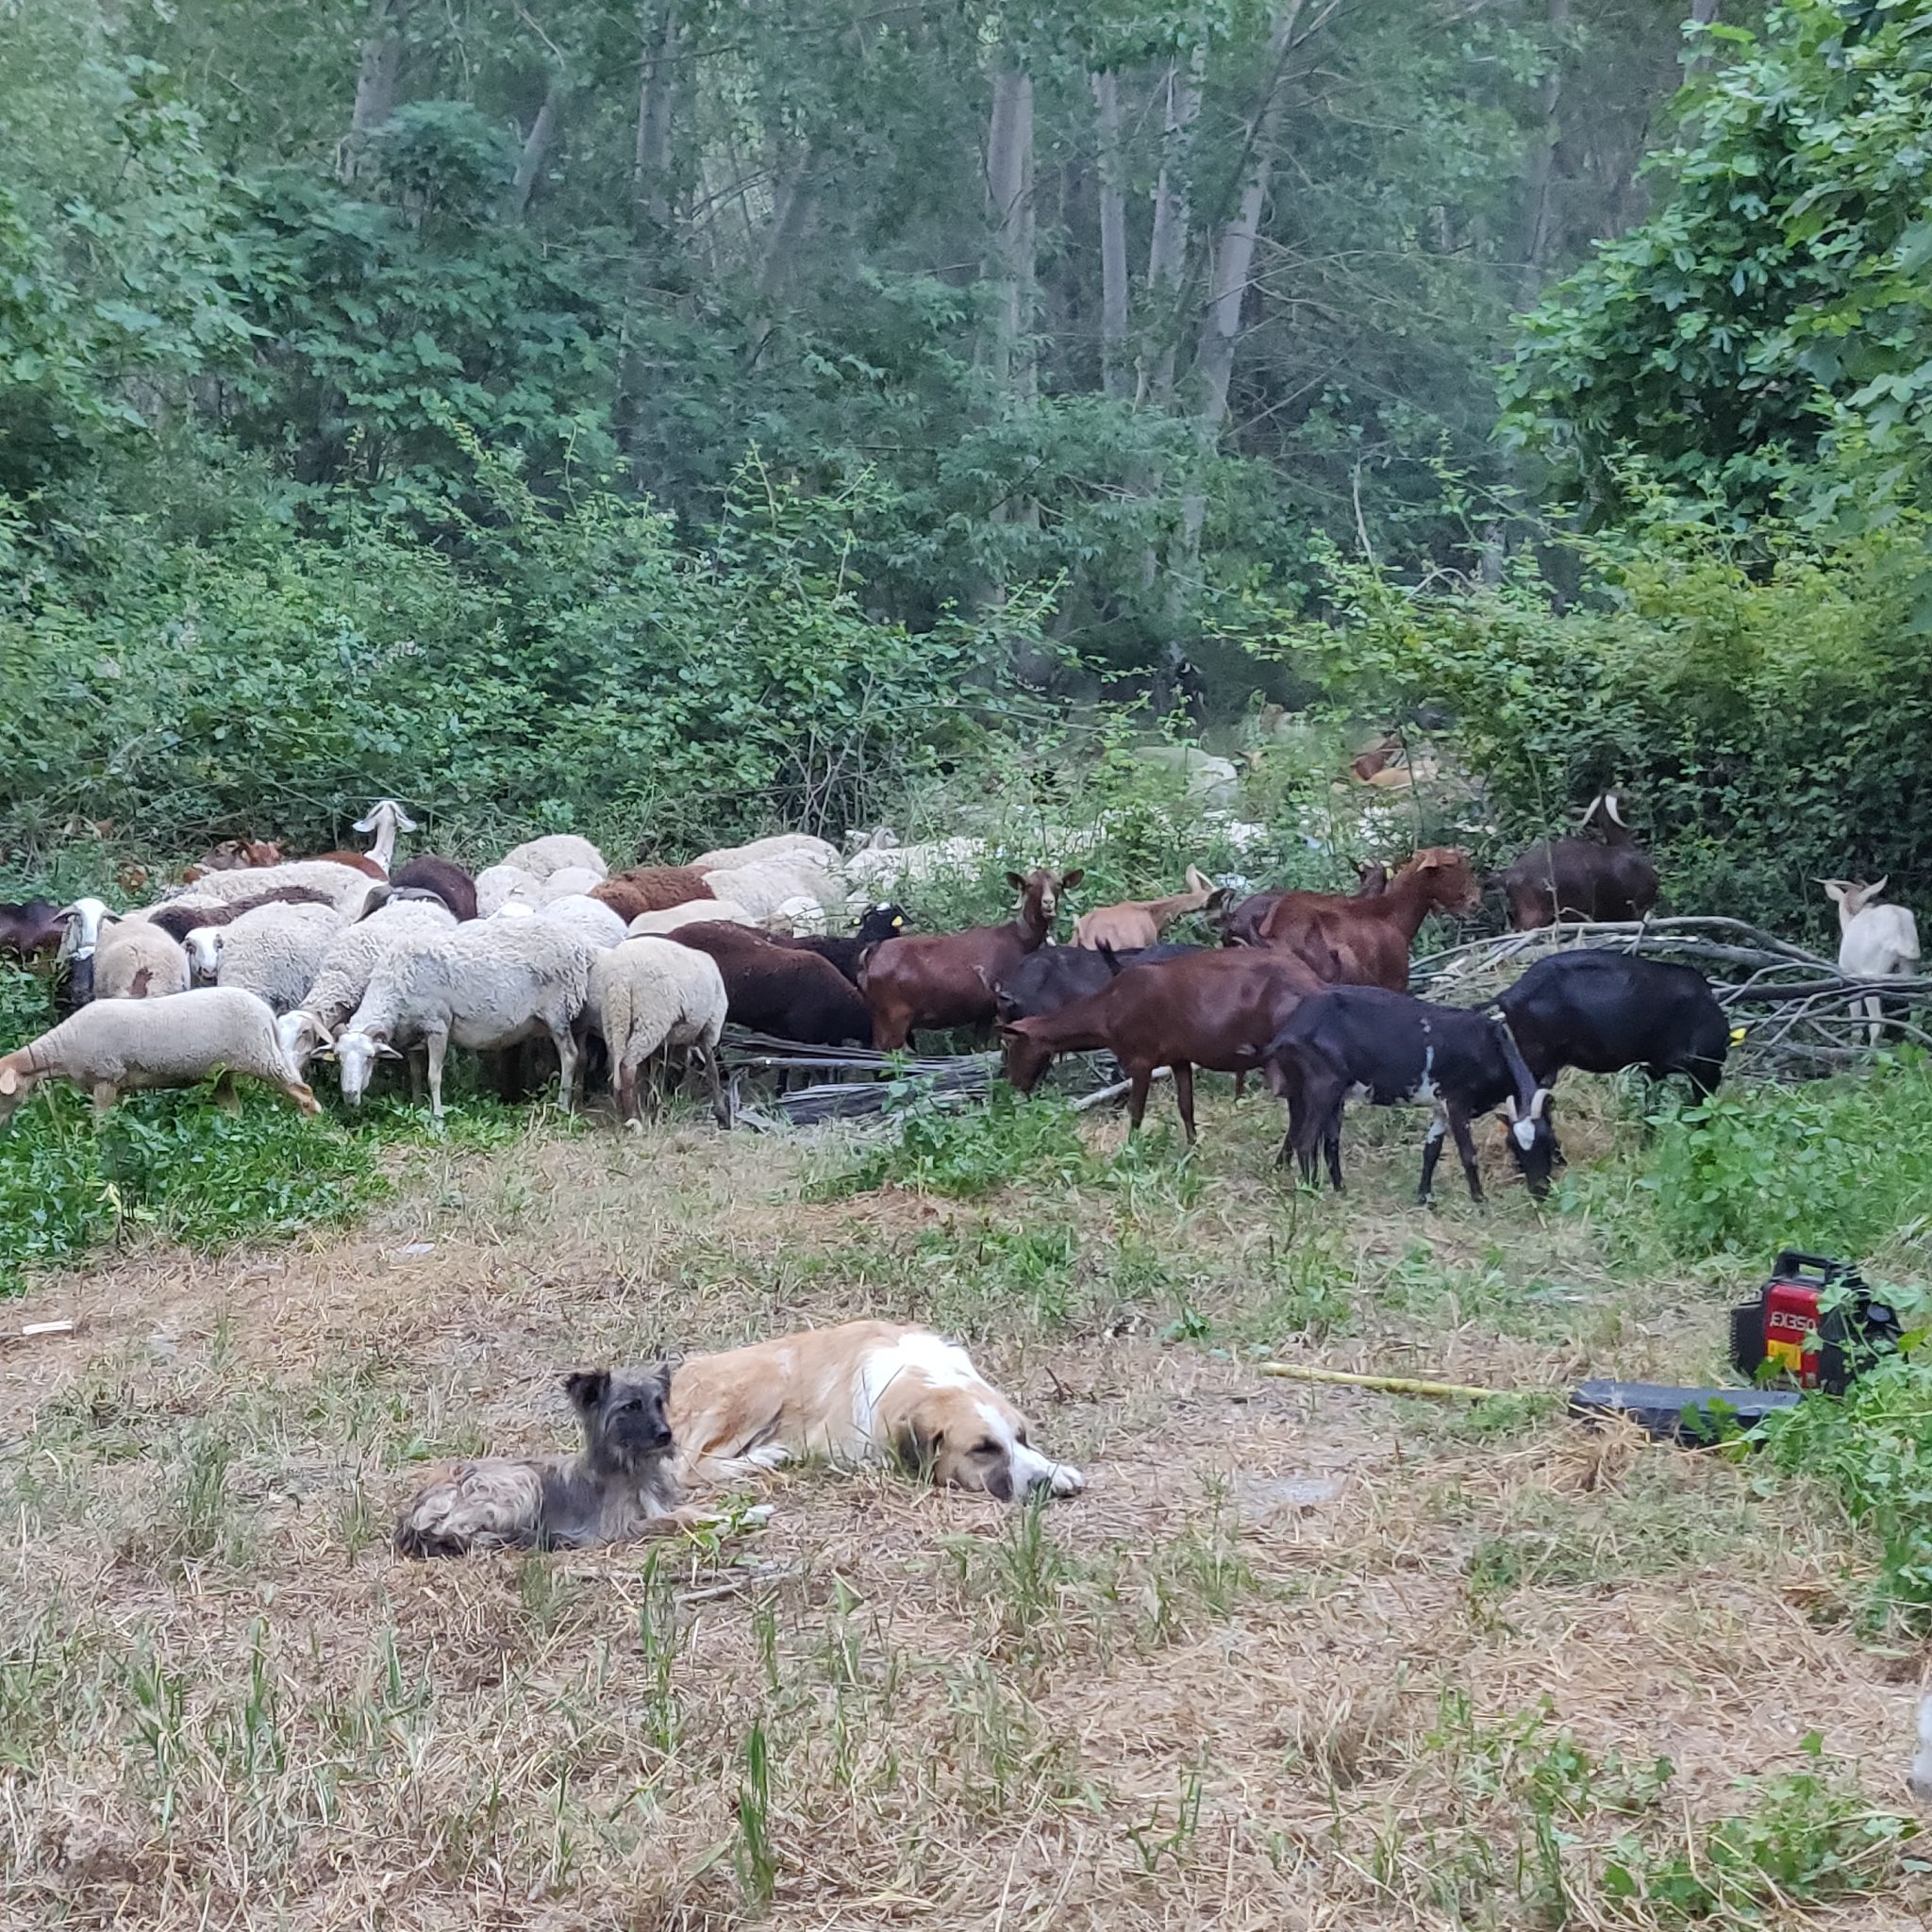 Sheep, goats and dogs